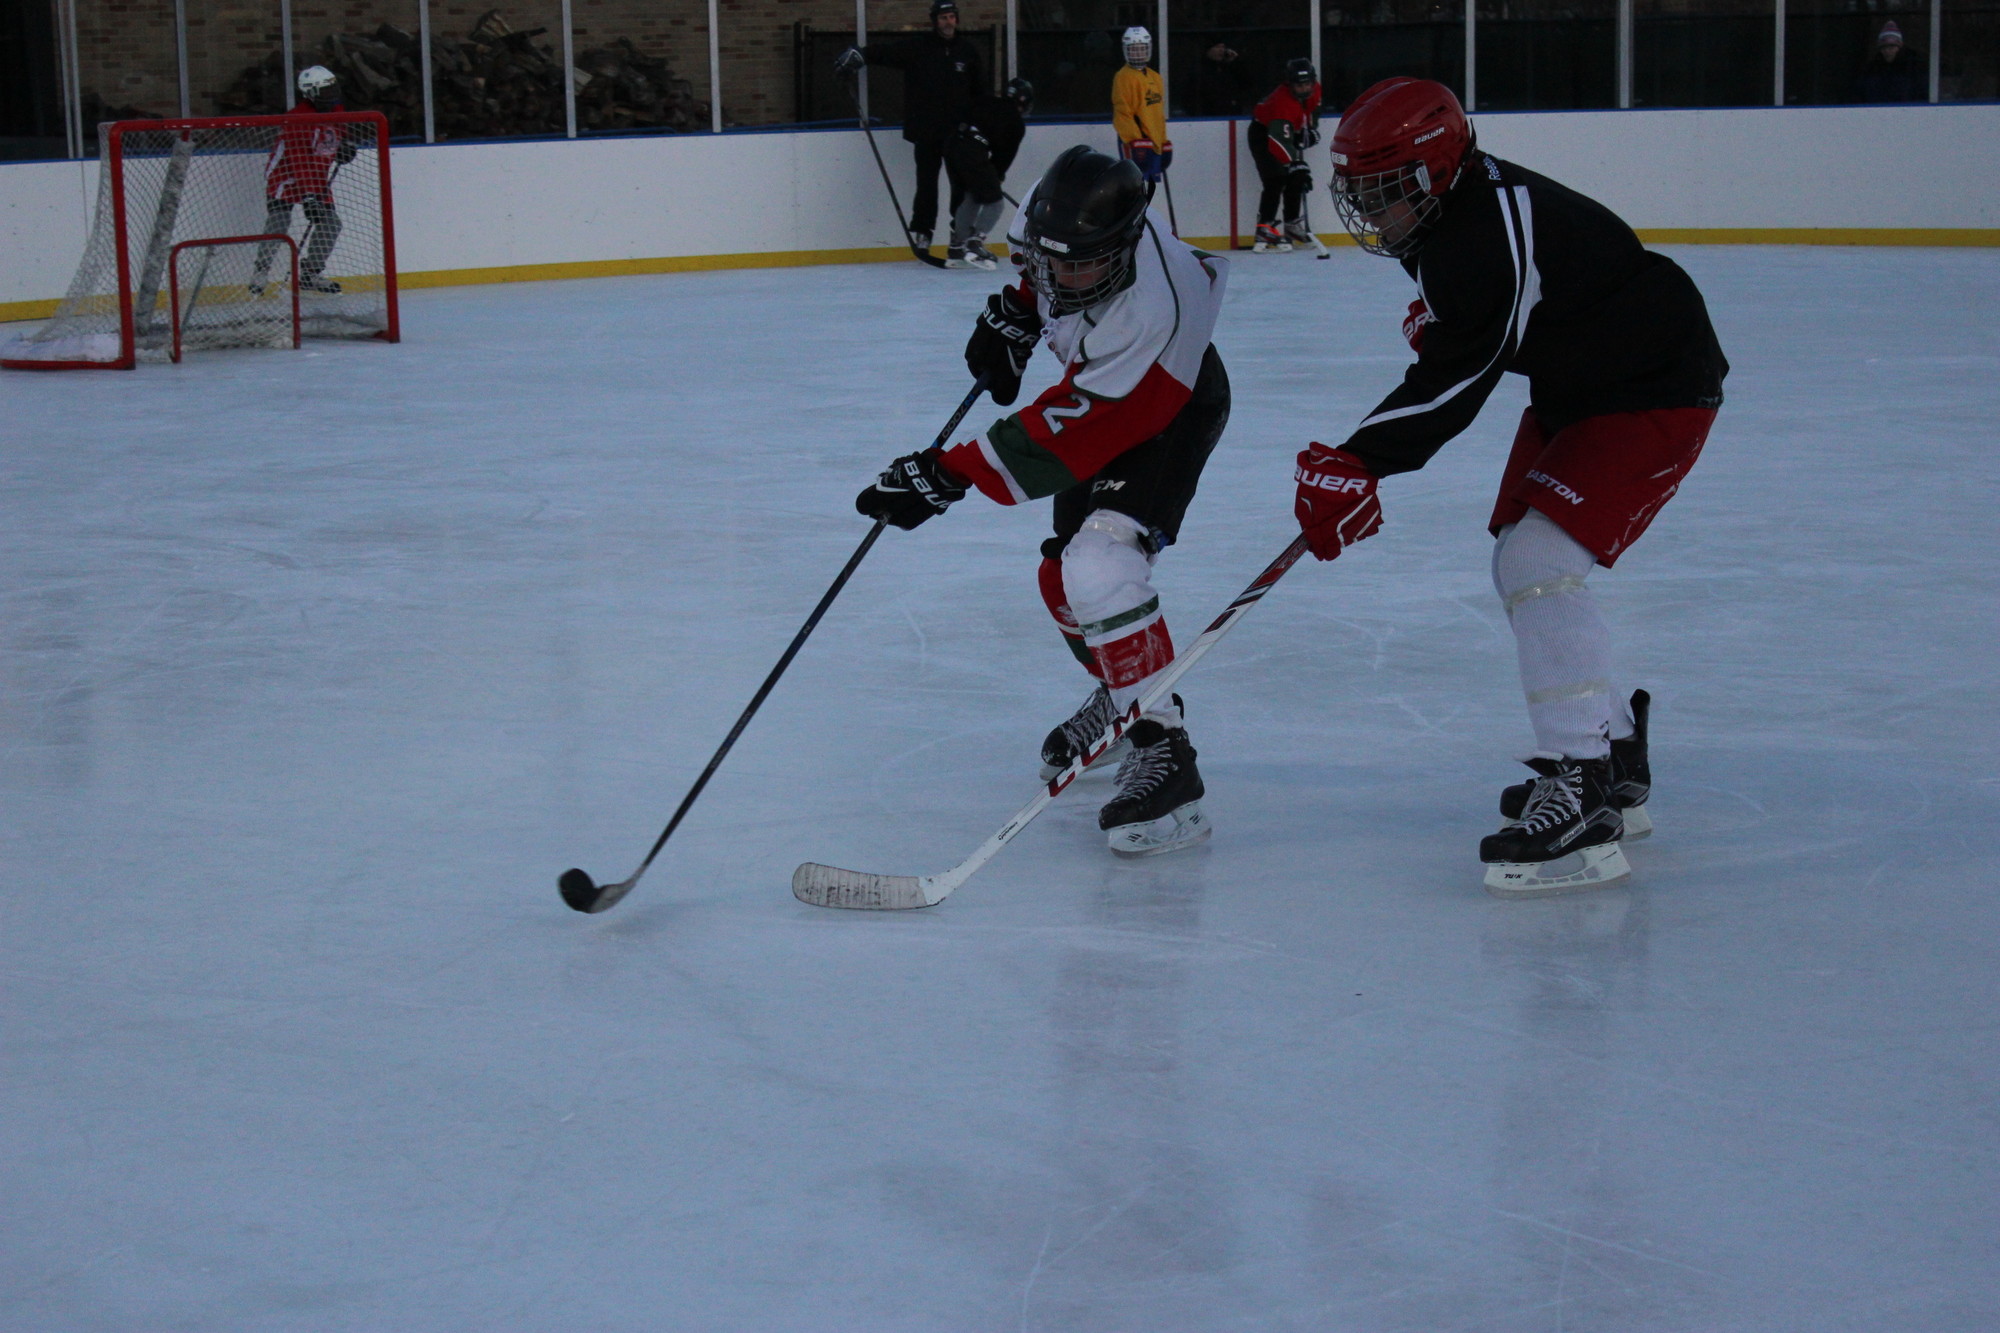 fighting for the puck at the Grant Park Ice Rink were Will Ehrlich, 13, left, and Ben Casalo, 13.